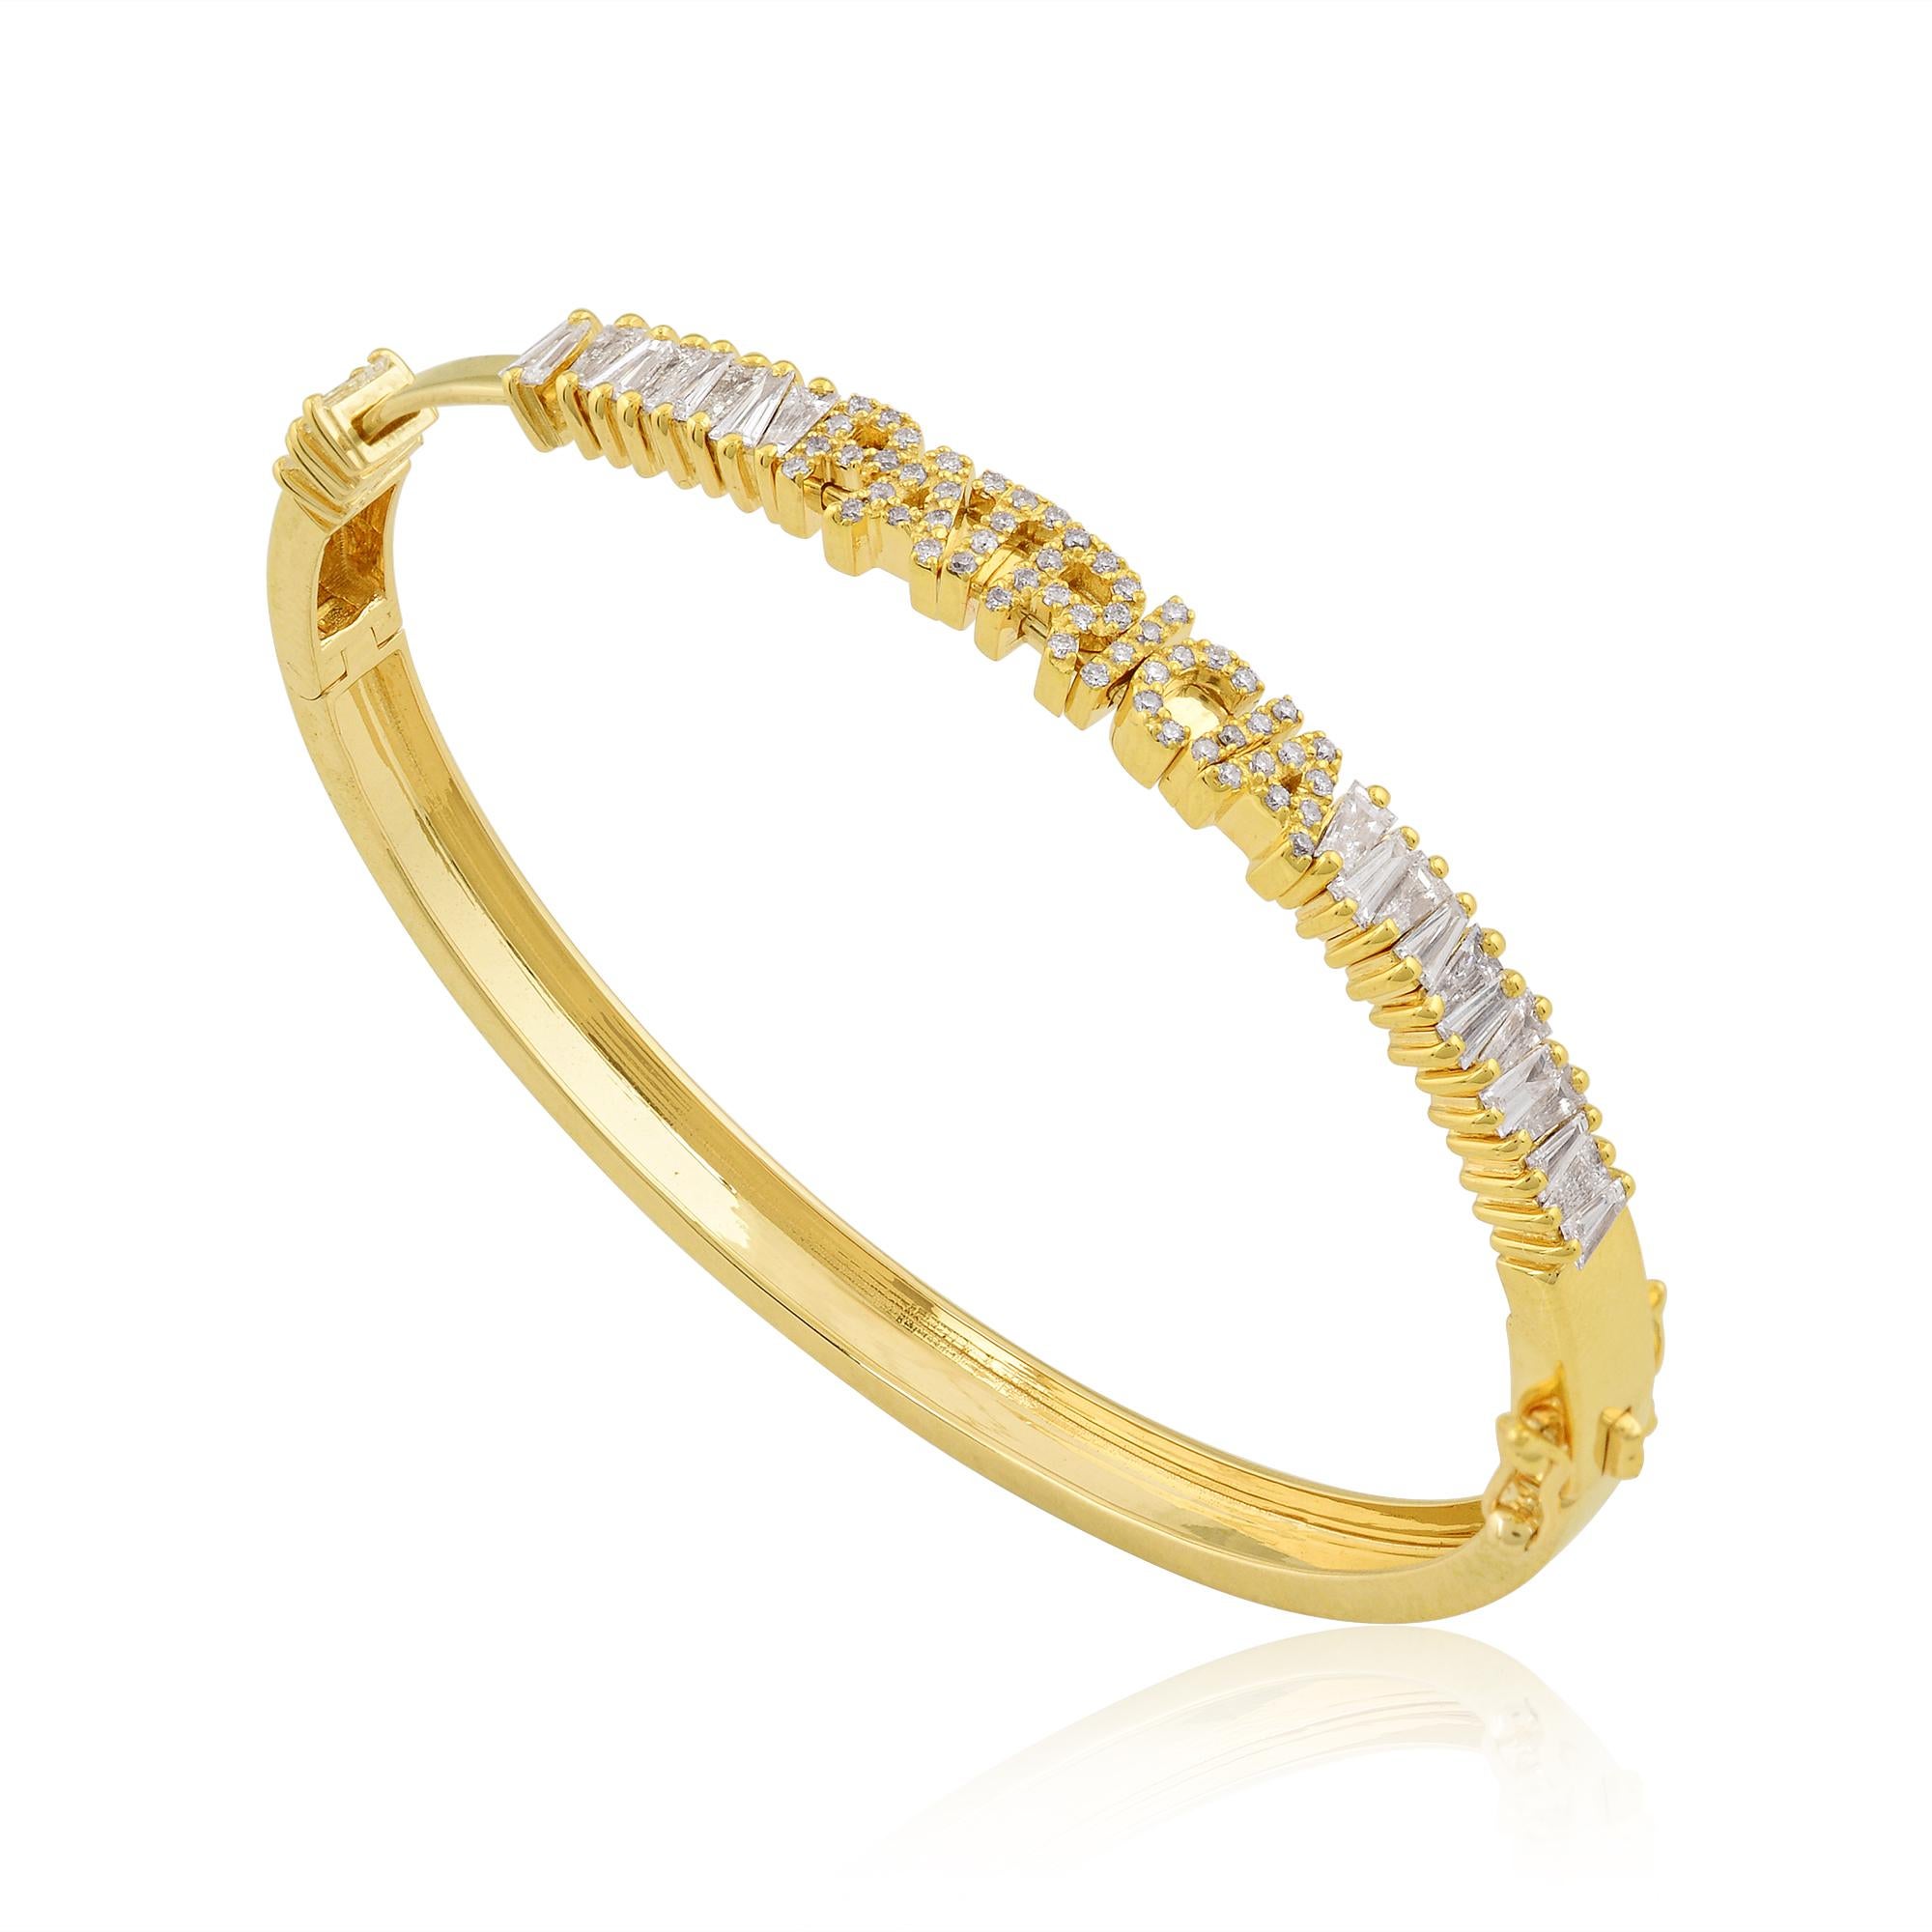 Indulge in the timeless elegance of our Natural Tapered Baguette Name Bracelet, a radiant expression of personalized luxury meticulously crafted in 18 Karat Yellow Gold. Each piece is lovingly handmade by skilled artisans, ensuring the utmost